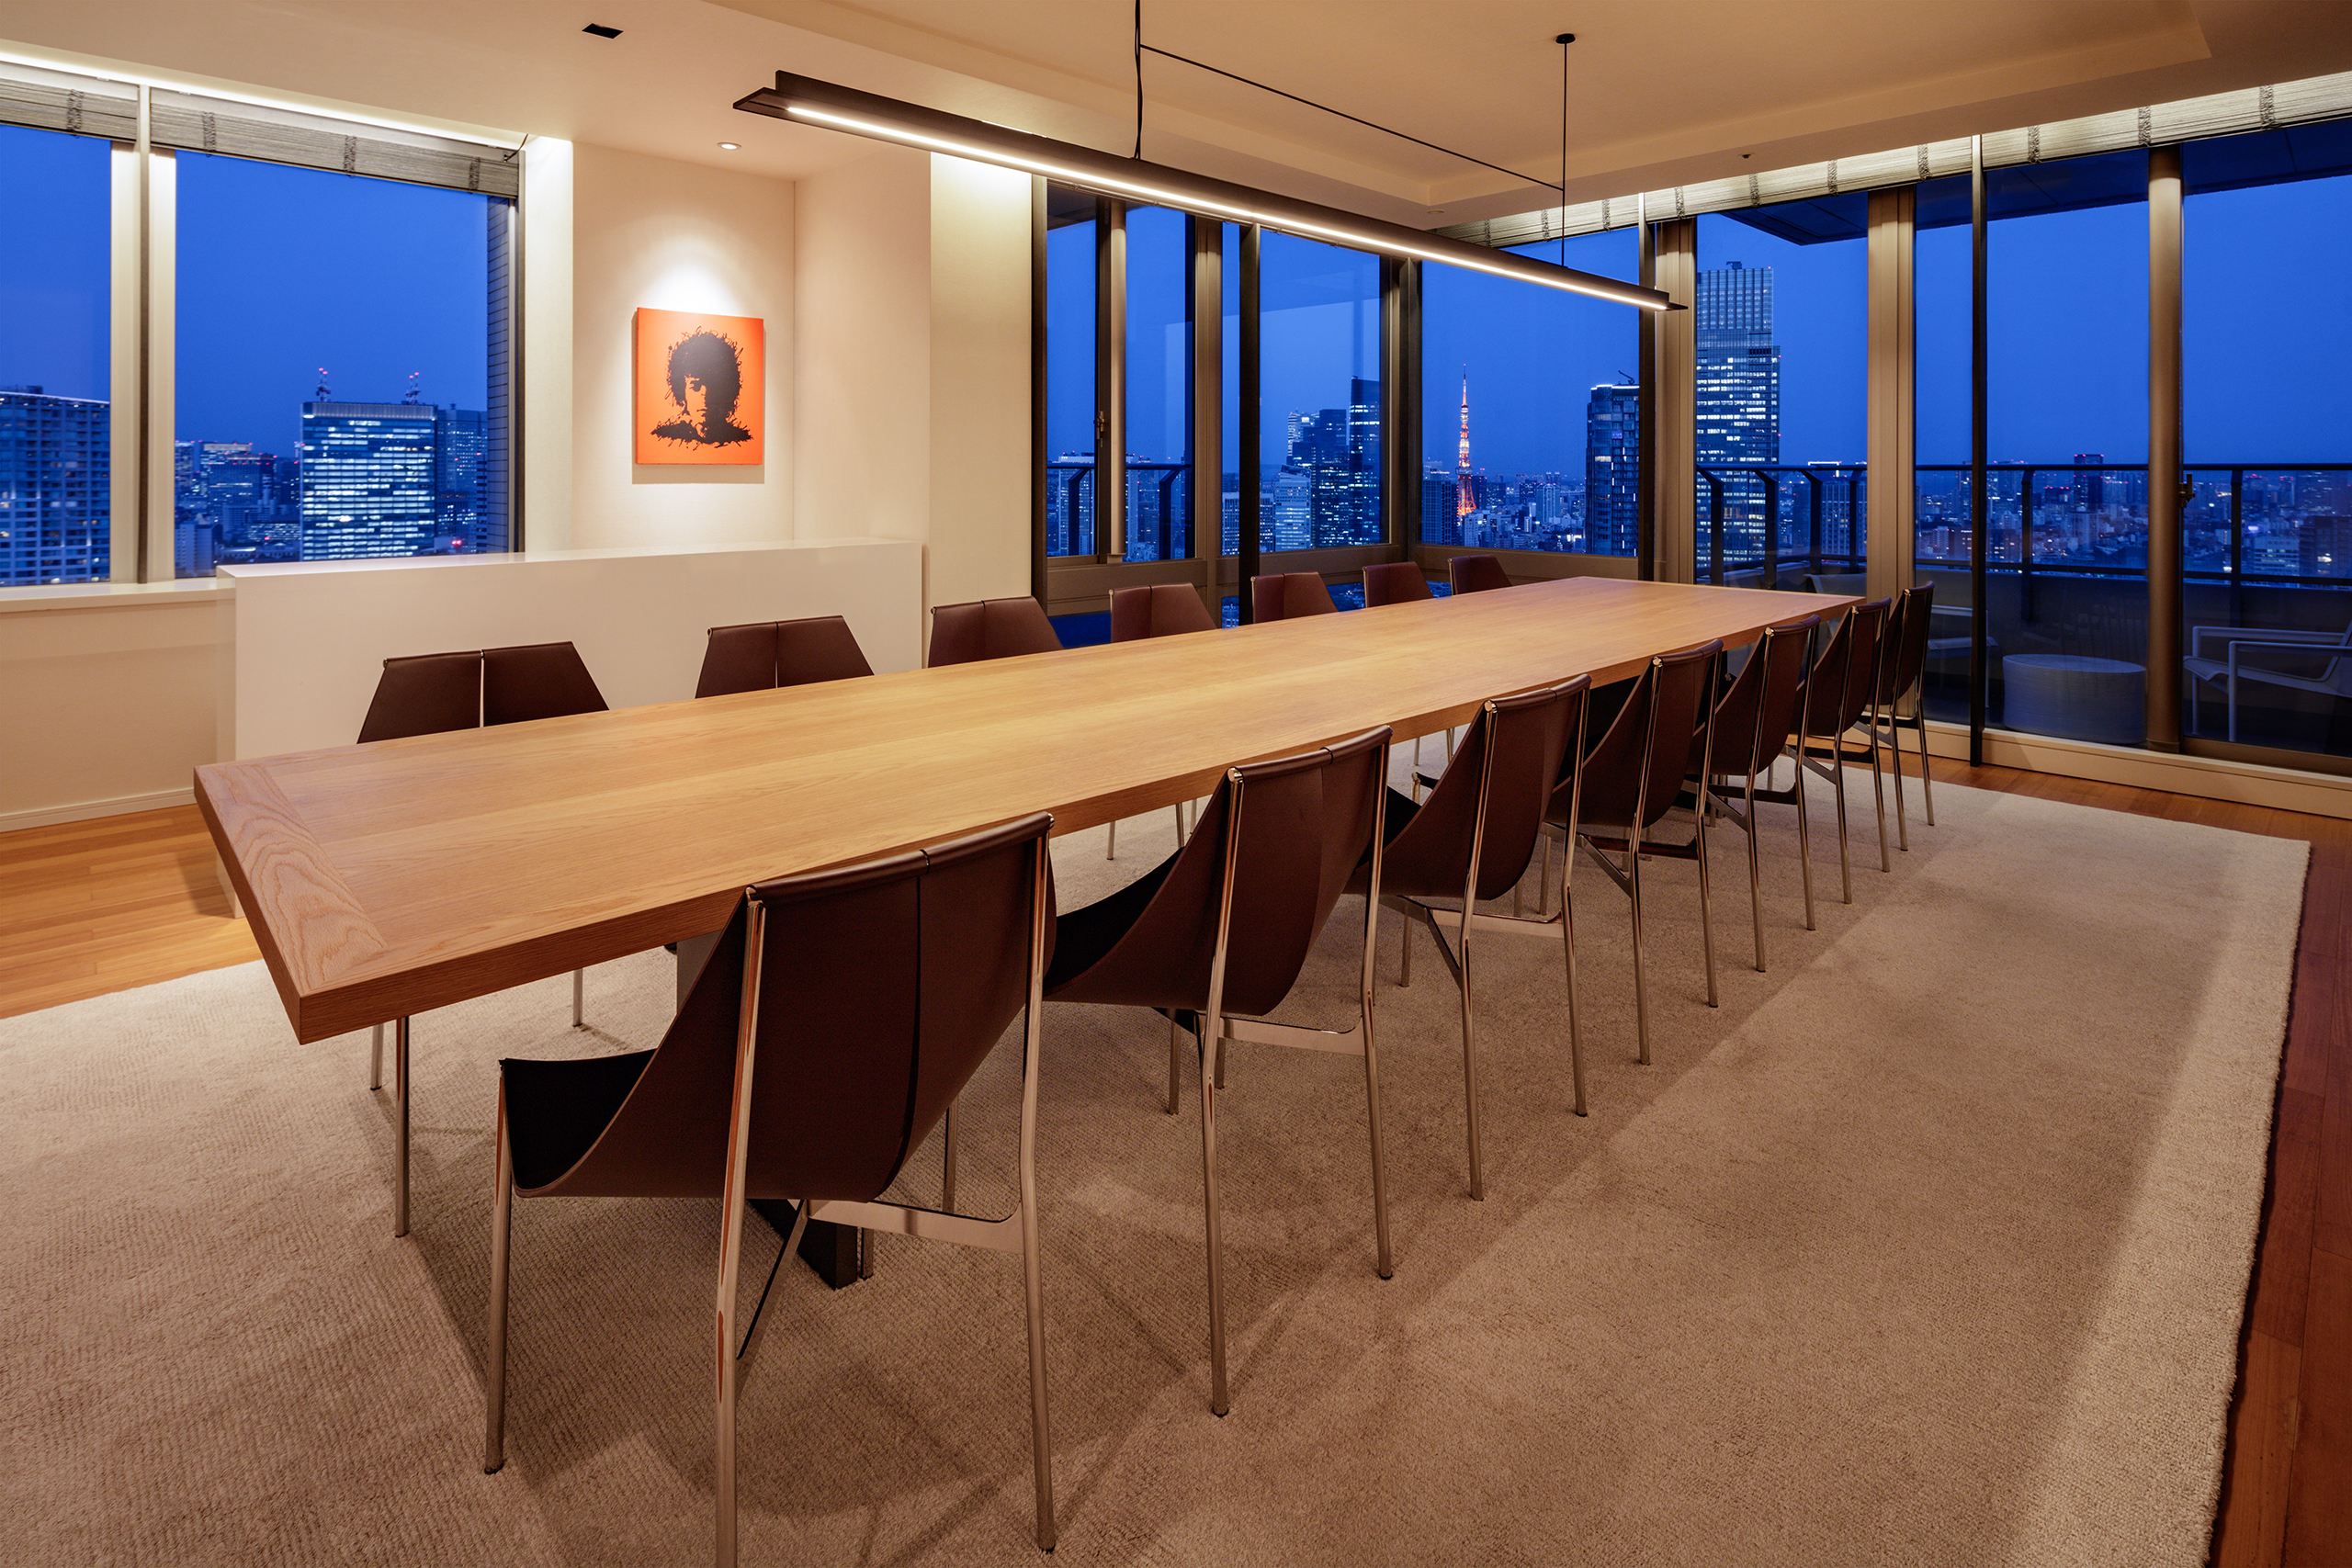 A meeting room where hip peoplenotions would gather. Aoichi Office Meeting Room Night Time